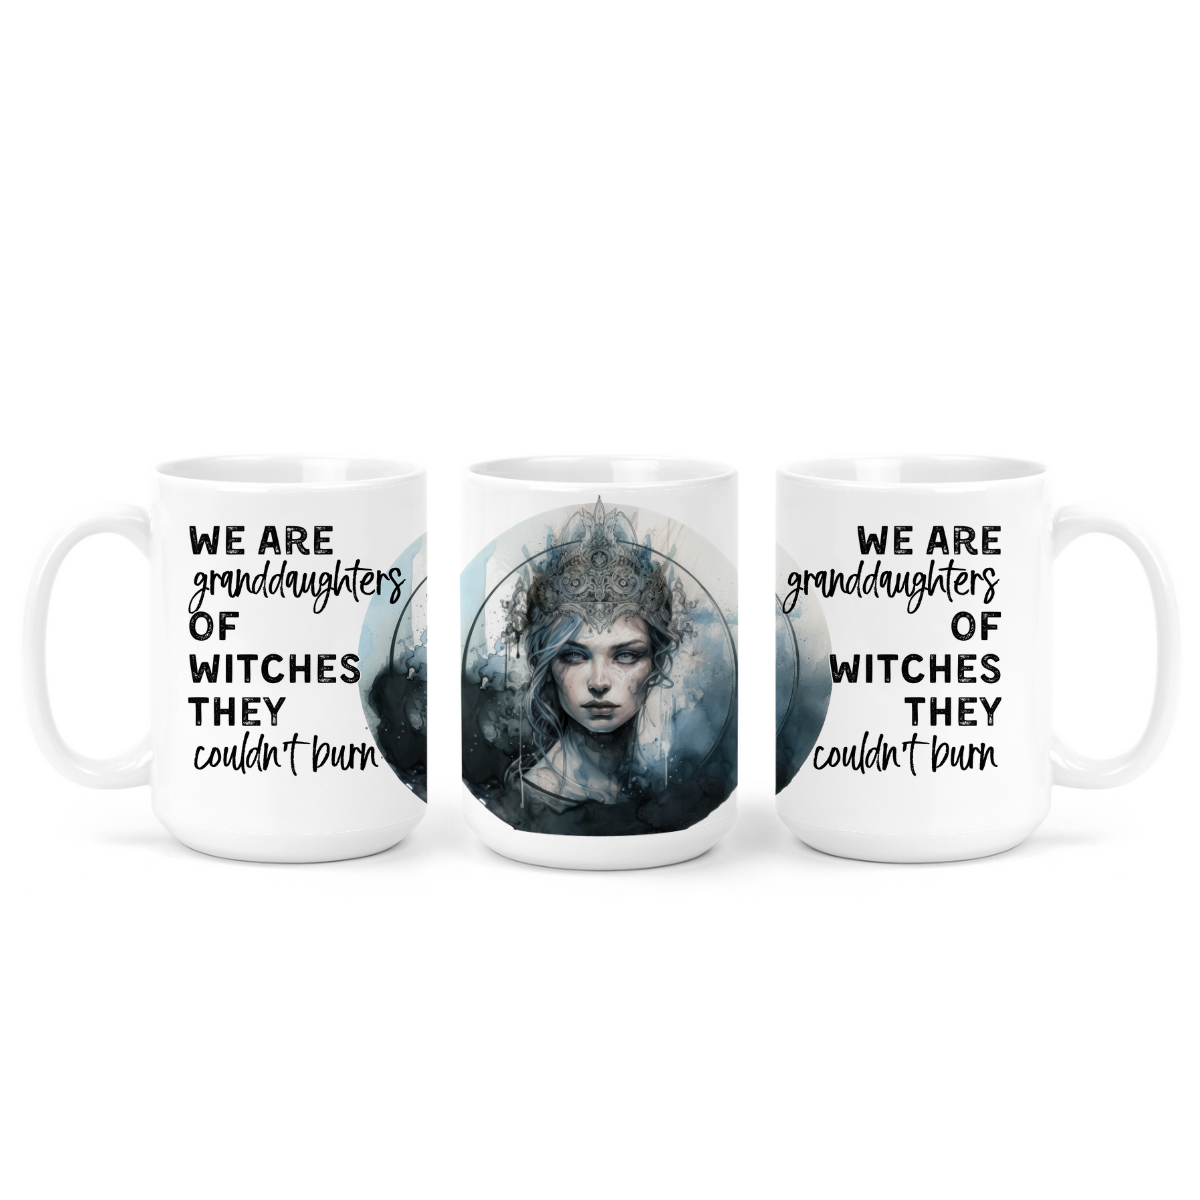 We are Granddaughters | Mug - The Pretty Things.ca